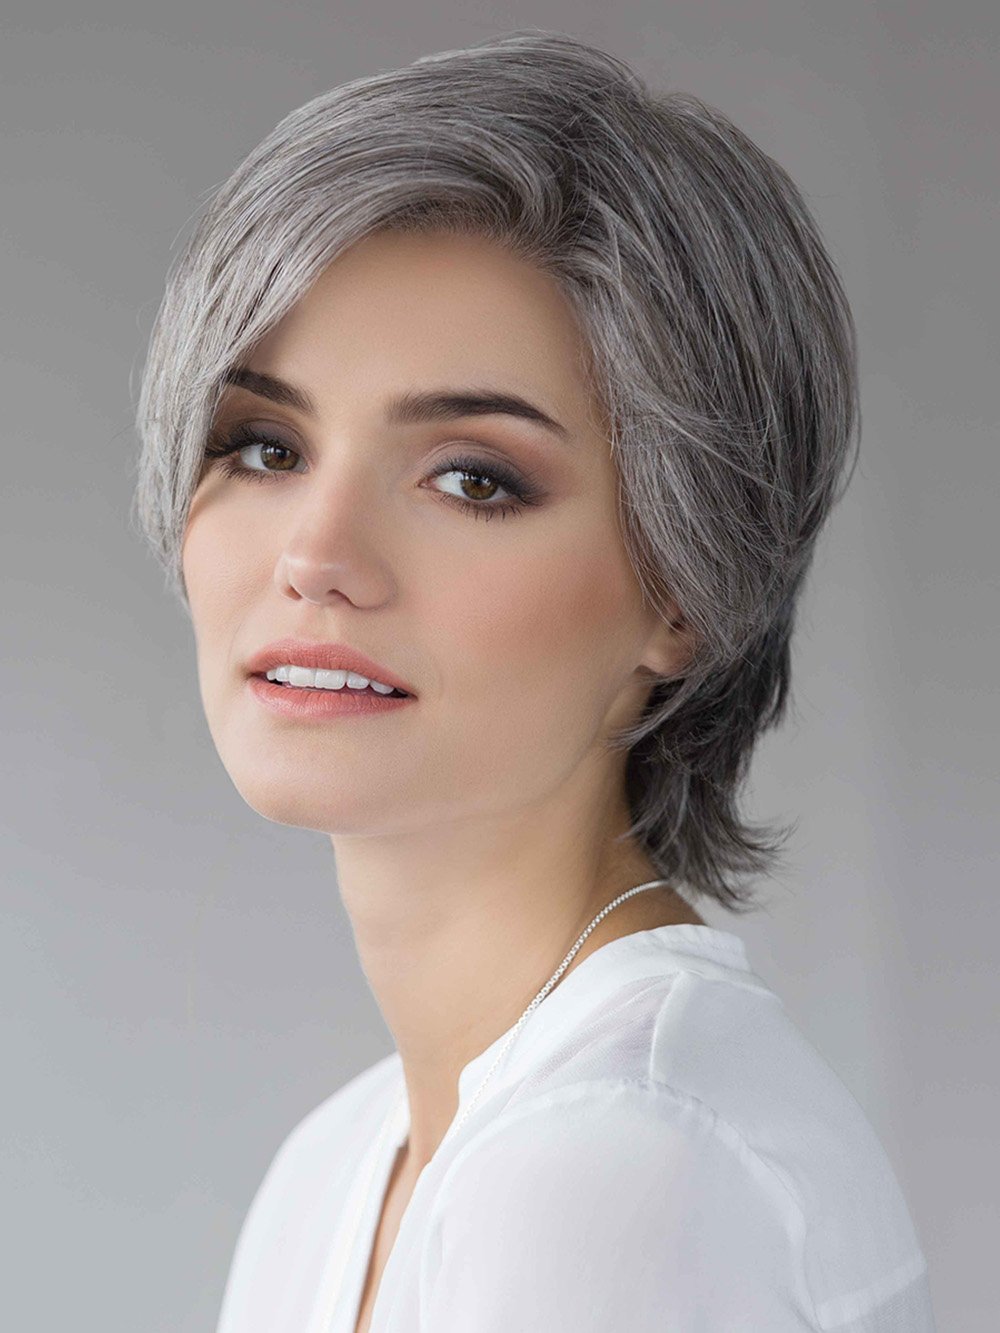 RUSH Wig by ELLEN WILLE in STONE-GREY MIX PPC MAIN IMAGE